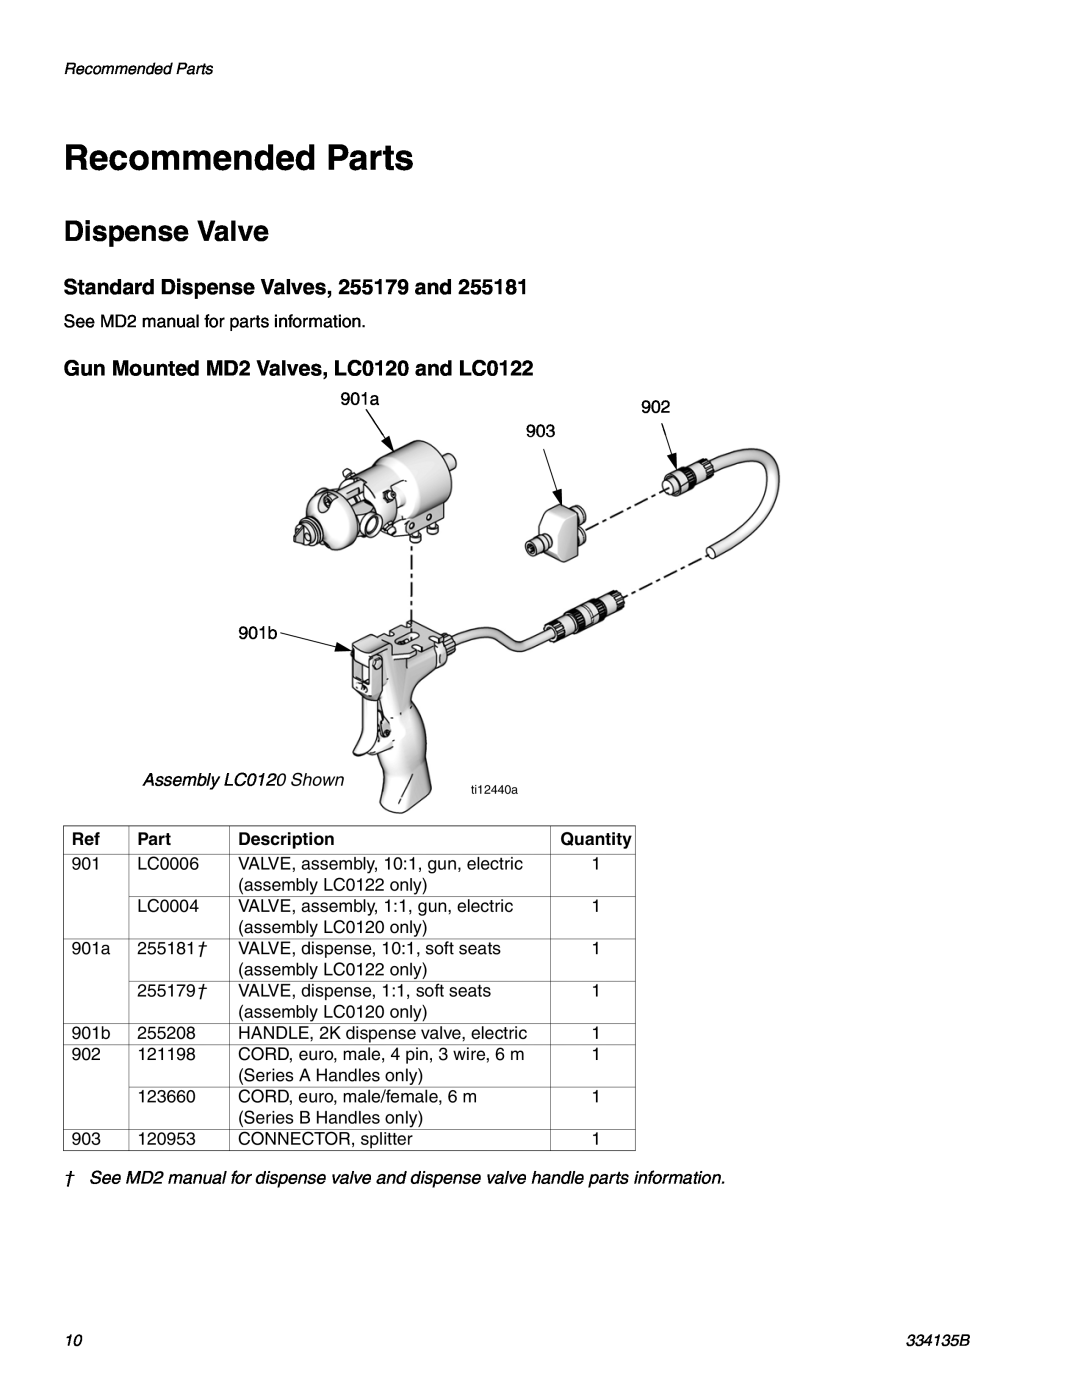 Graco 334135B Recommended Parts, Standard Dispense Valves, 255179 and, Gun Mounted MD2 Valves, LC0120 and LC0122, 901a 